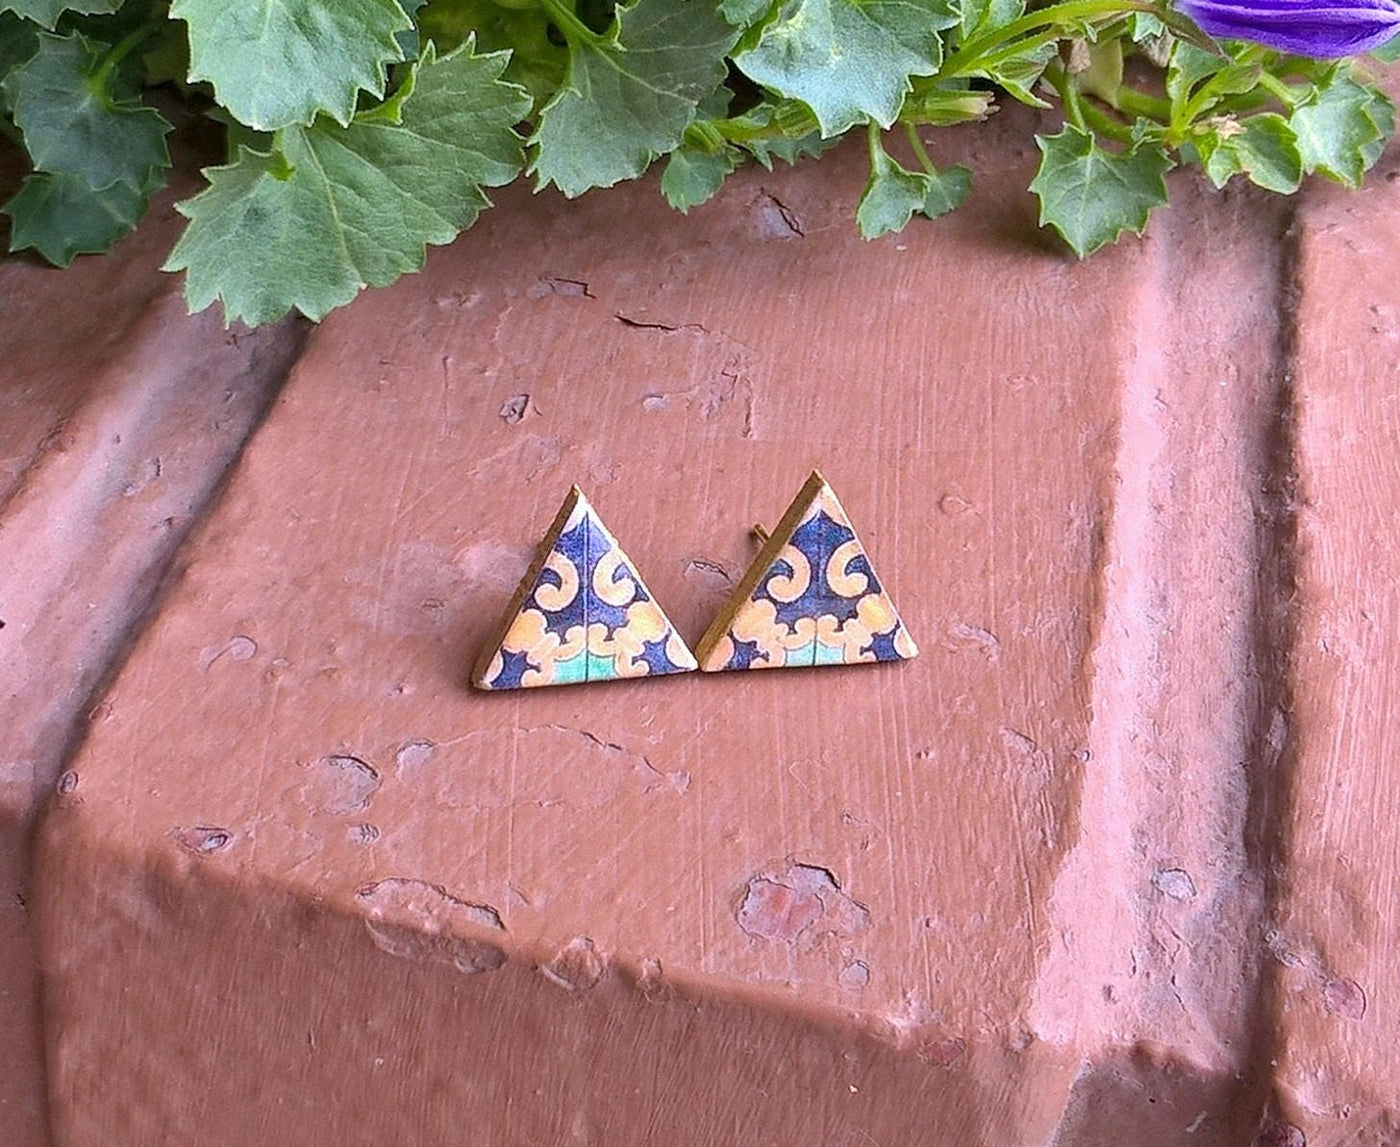 PAOLA - Mexican Triangle Tile Stud Earrings